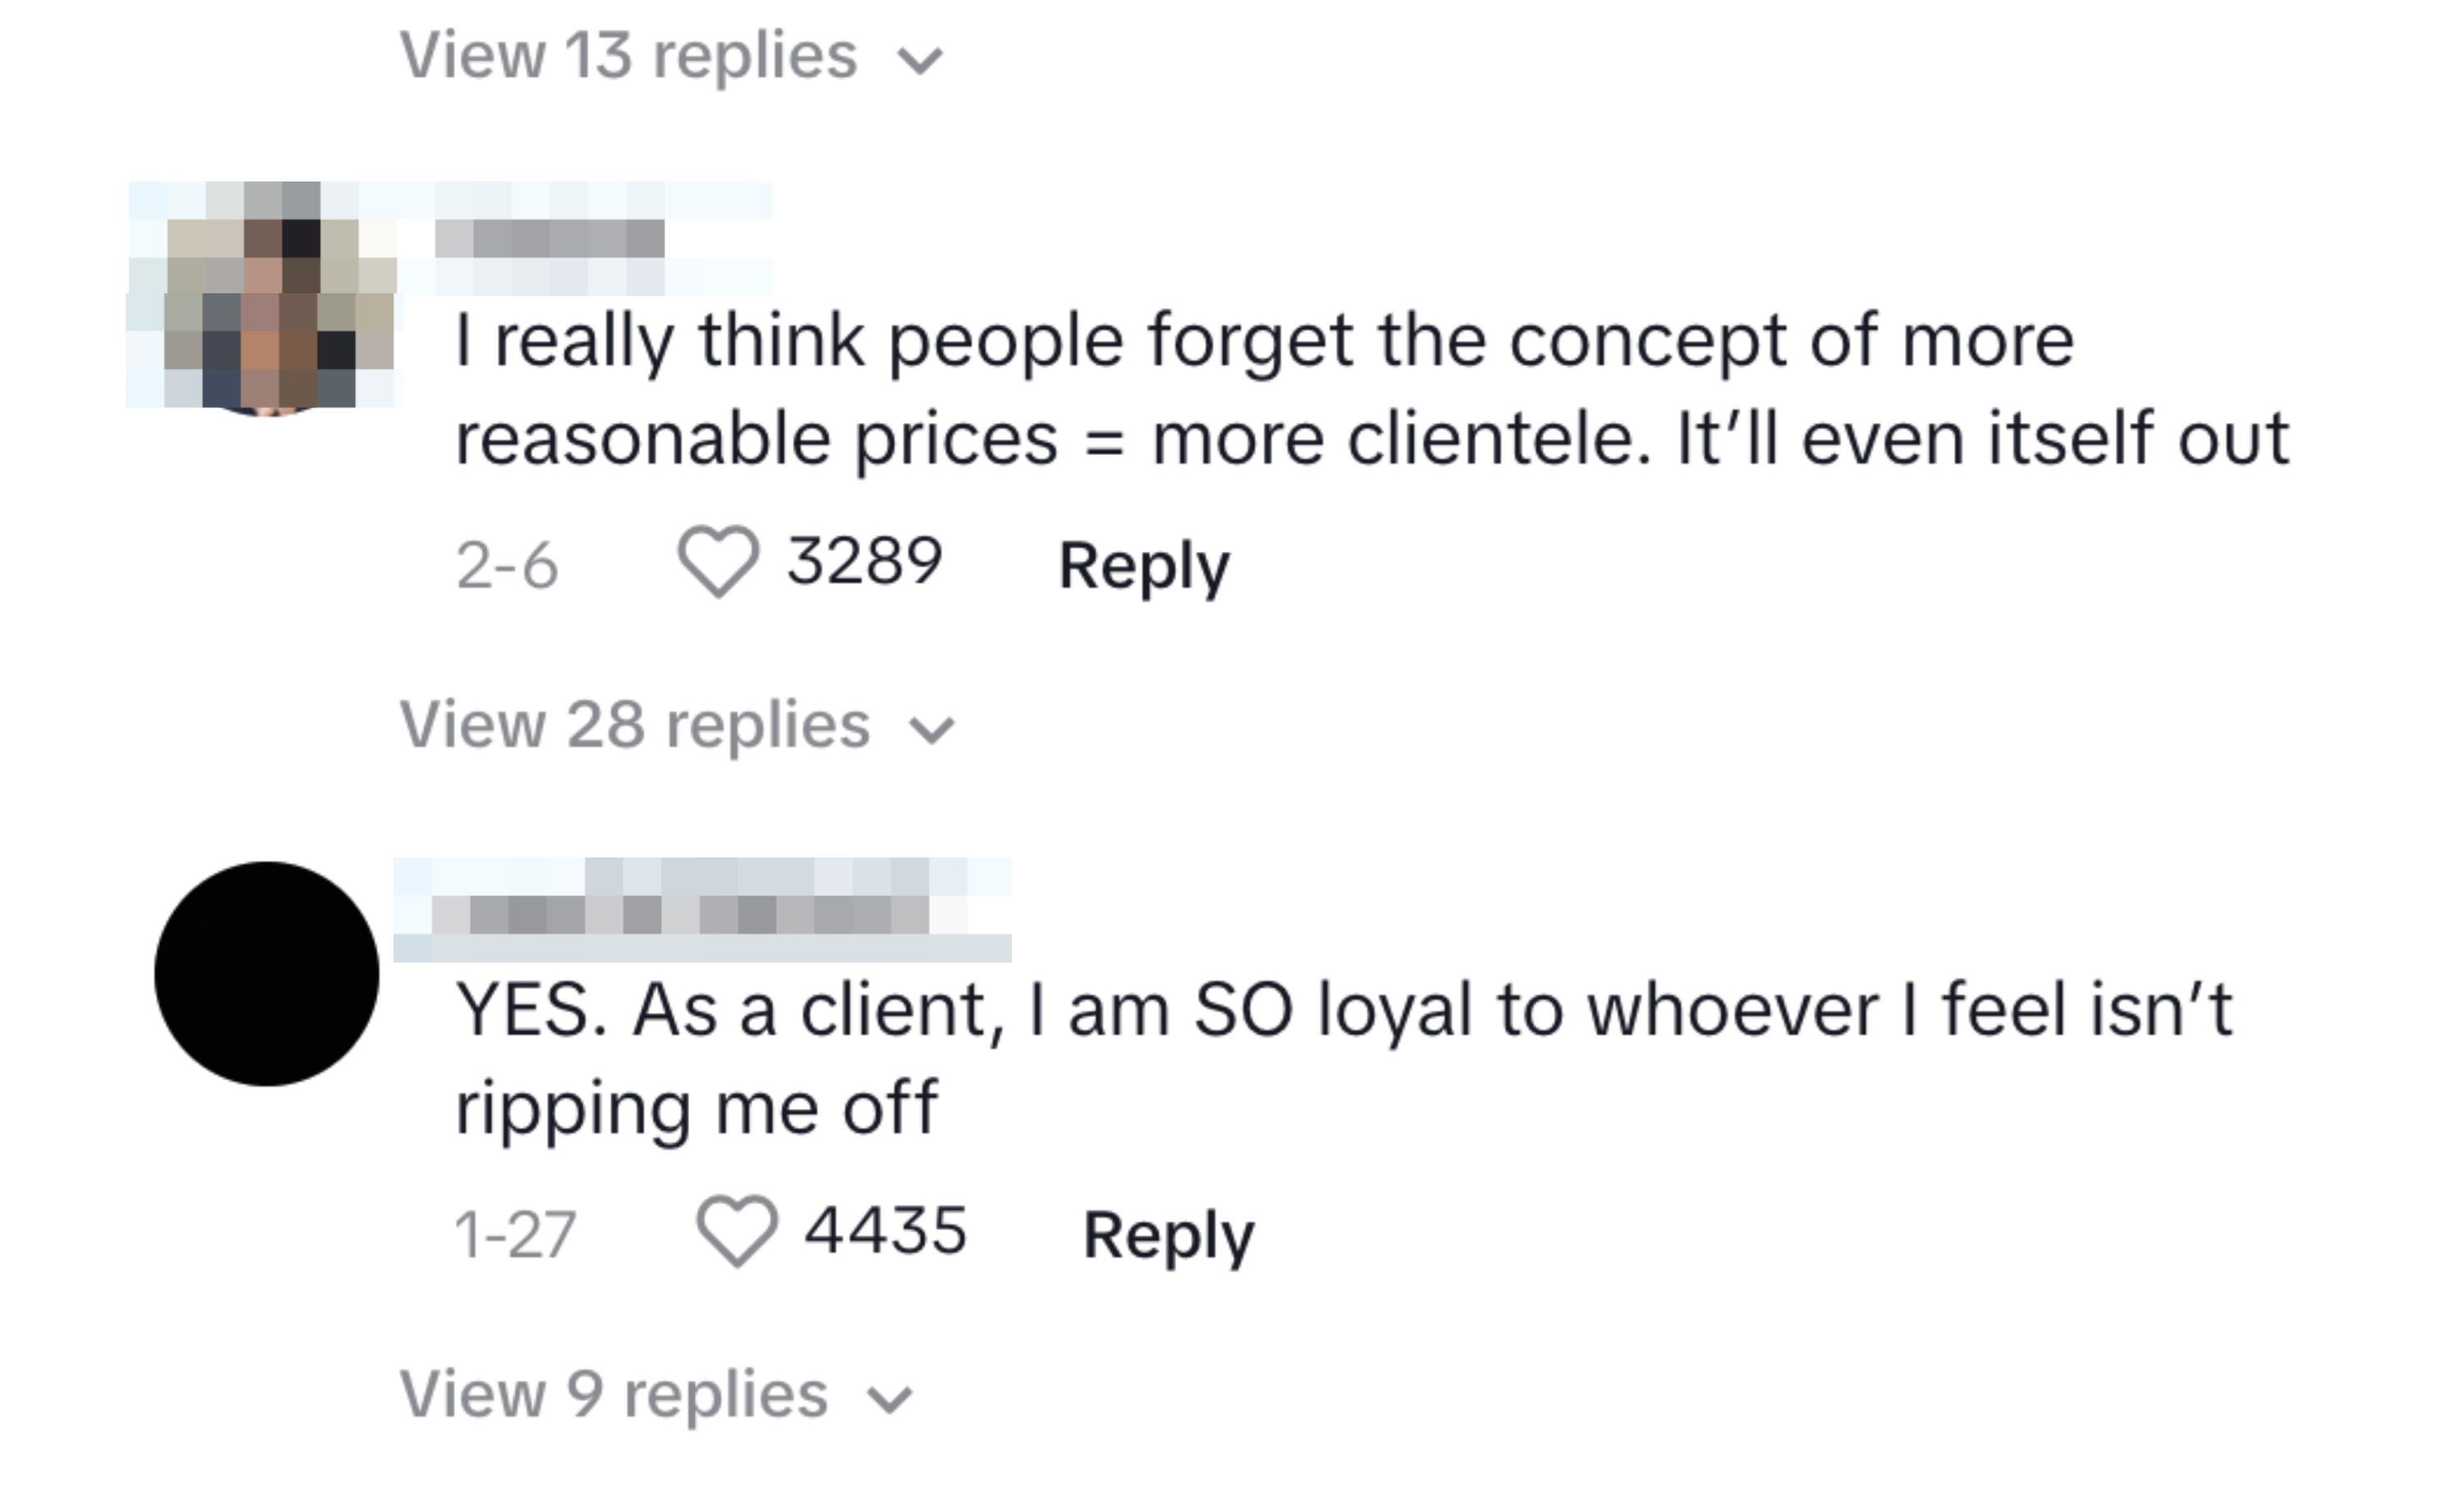 Comments on a social media post, discussing opinions on the cost of an item and customer loyalty